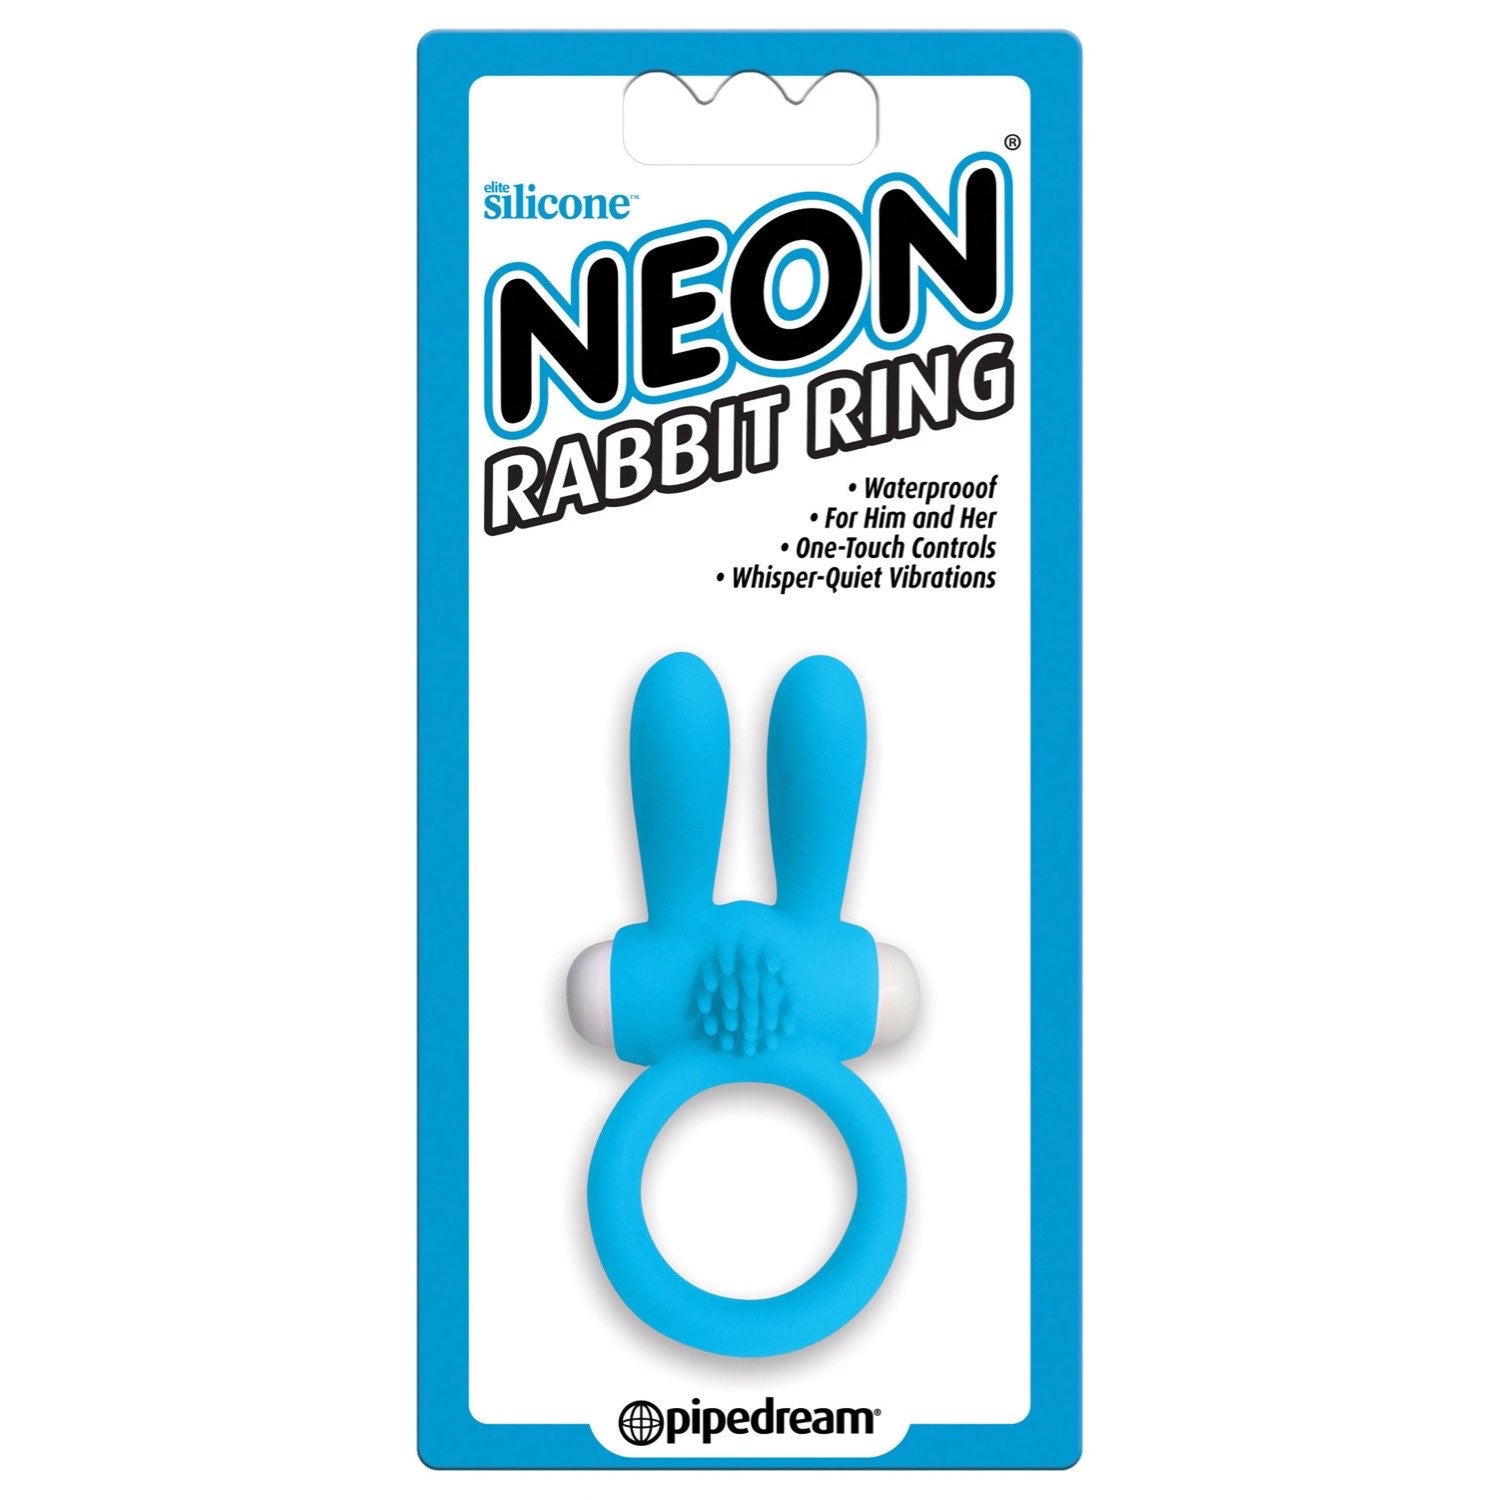  Neon Rabbit Ring - Blue Vibrating Cock Ring by Pipedream